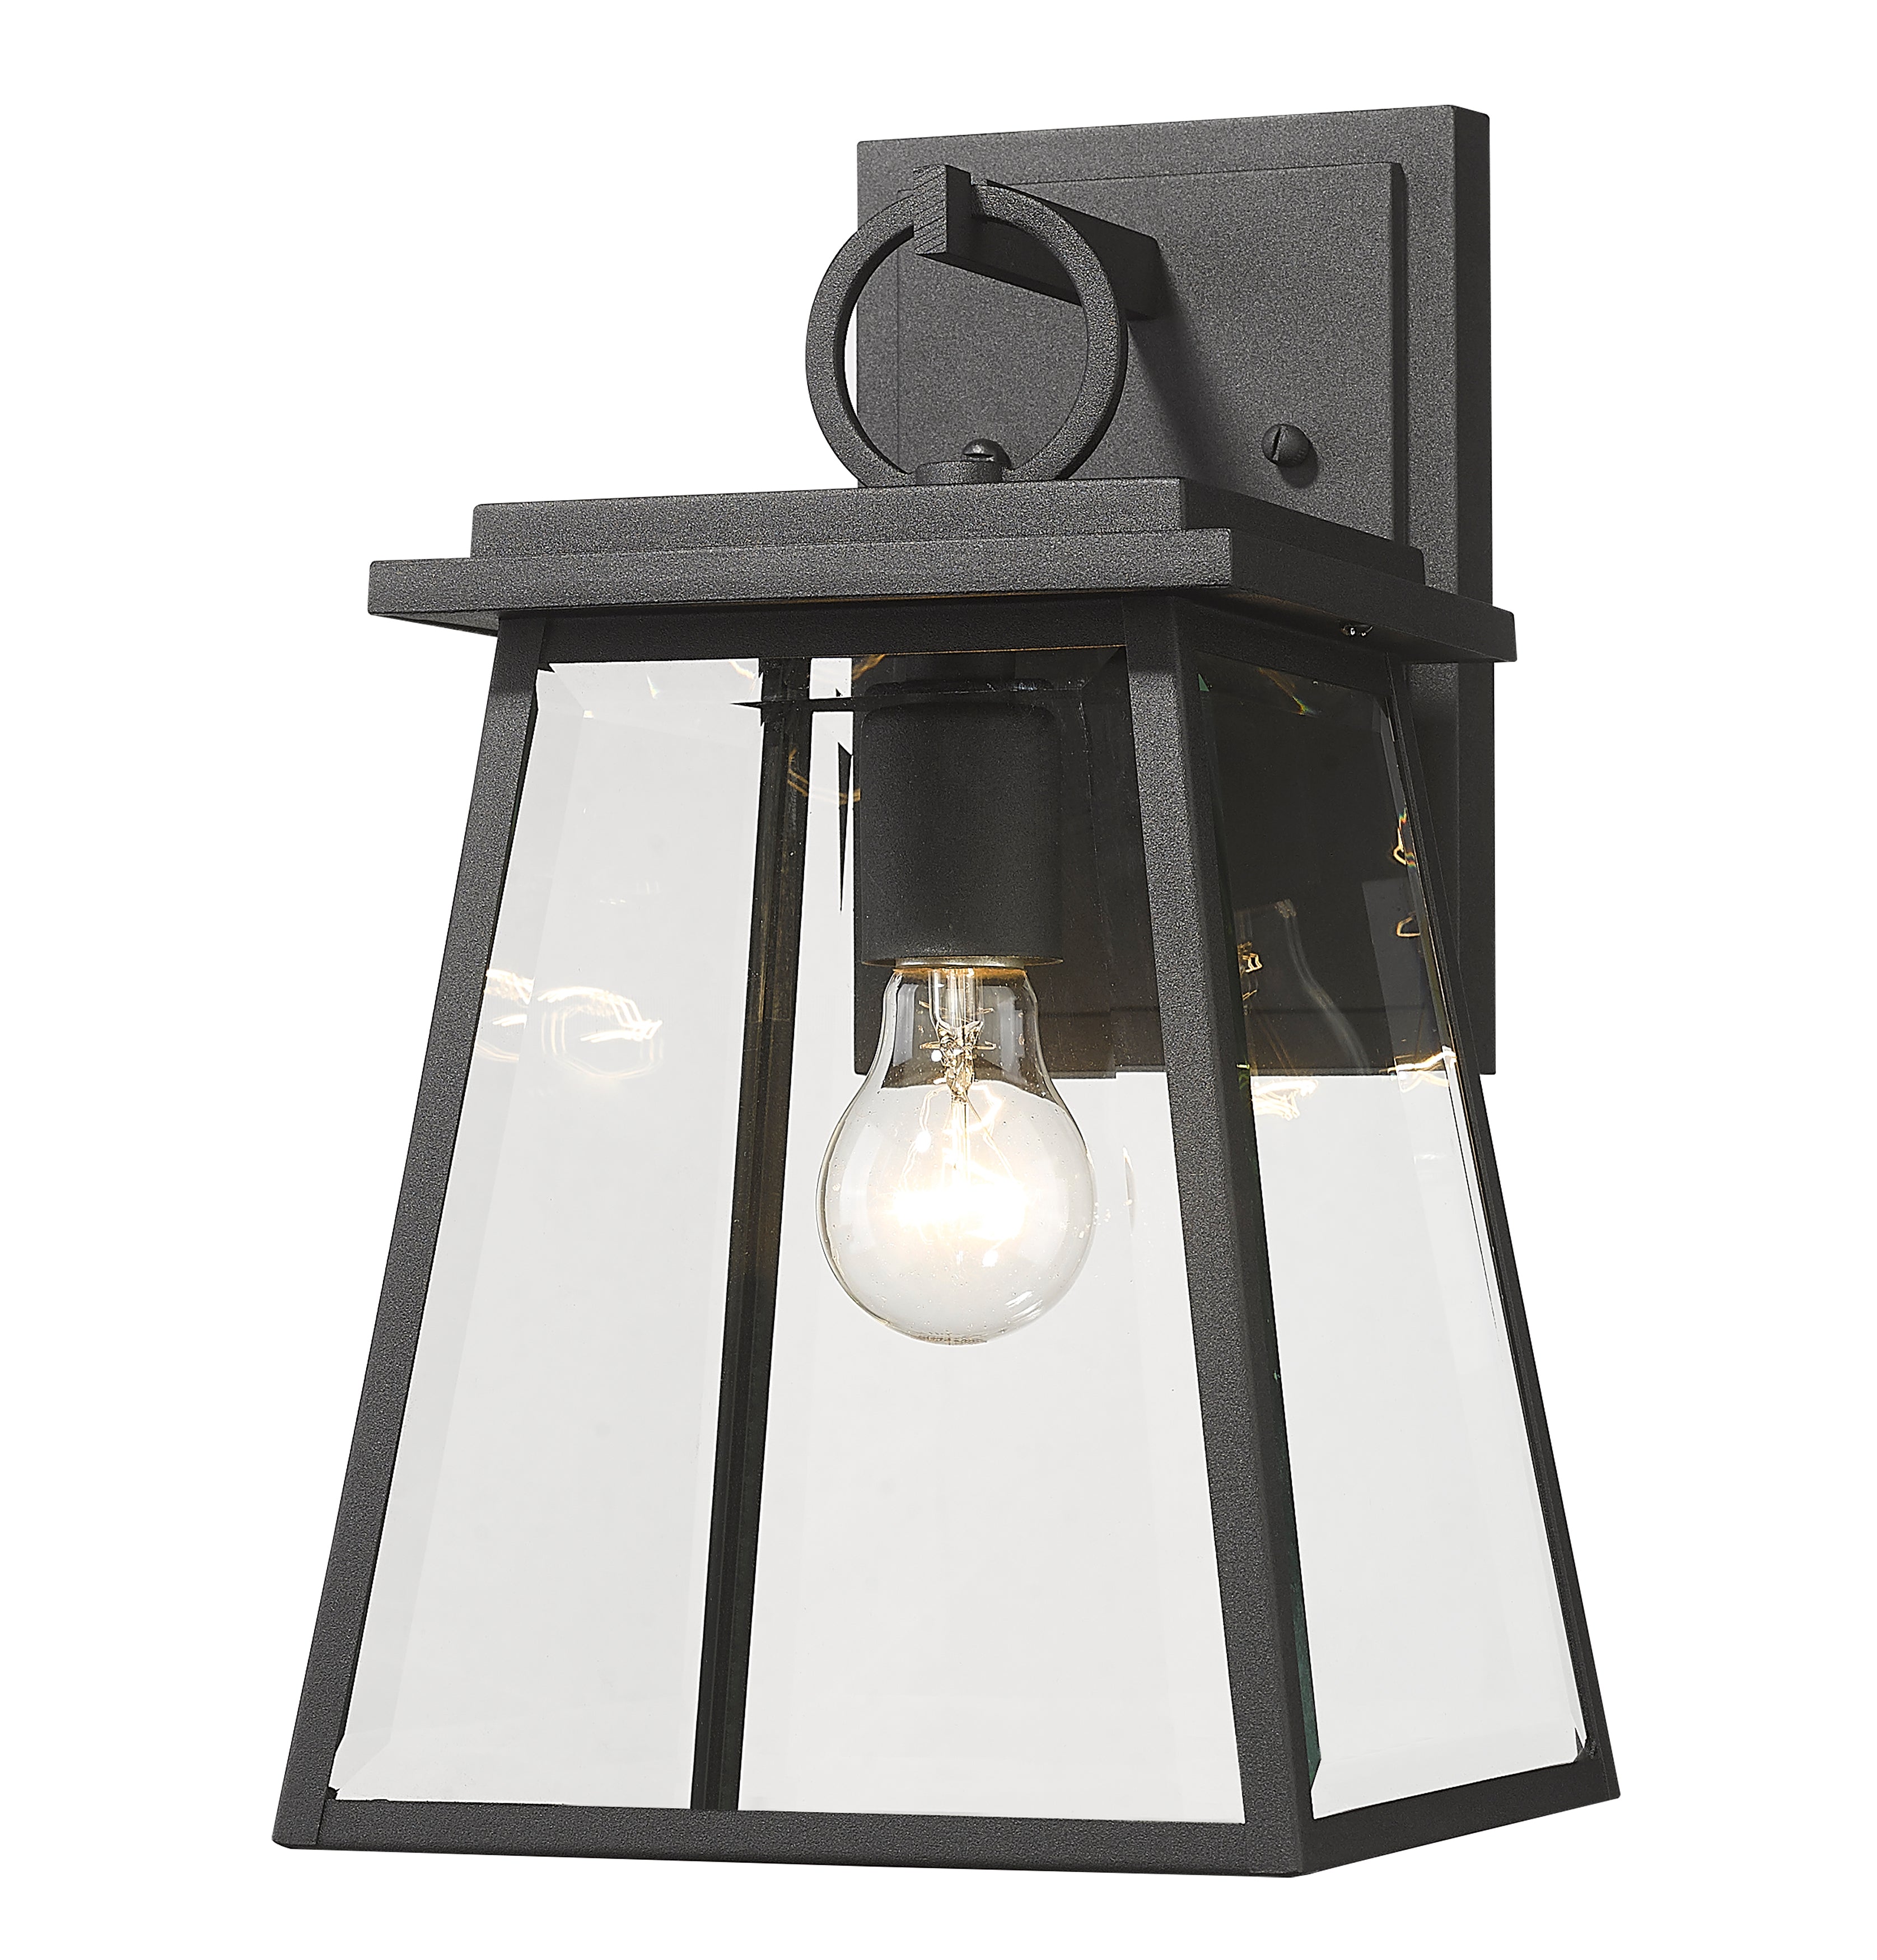 BROUGHTON Outdoor wall sconce Black - 521S-BK | Z-LITE